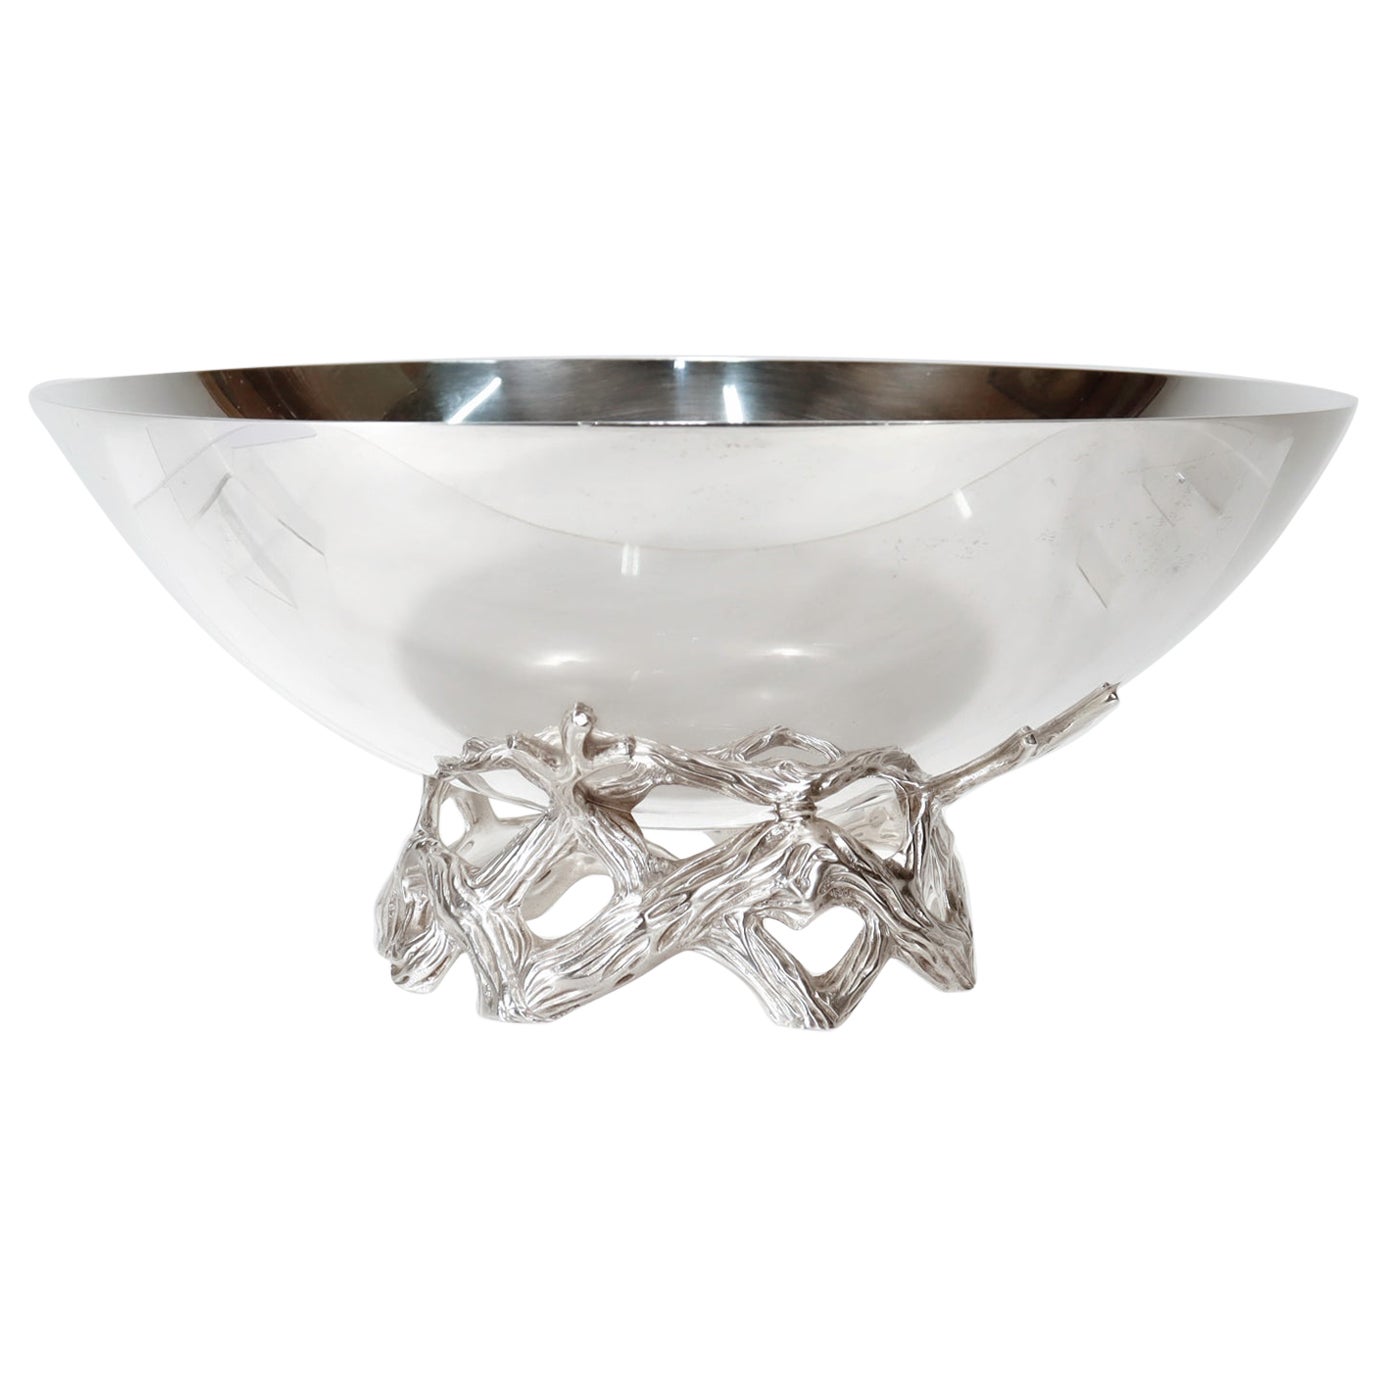 Postmodern Tiffany & Co. Sterling Silver Centerpiece Bowl Model No 23886 For Sale